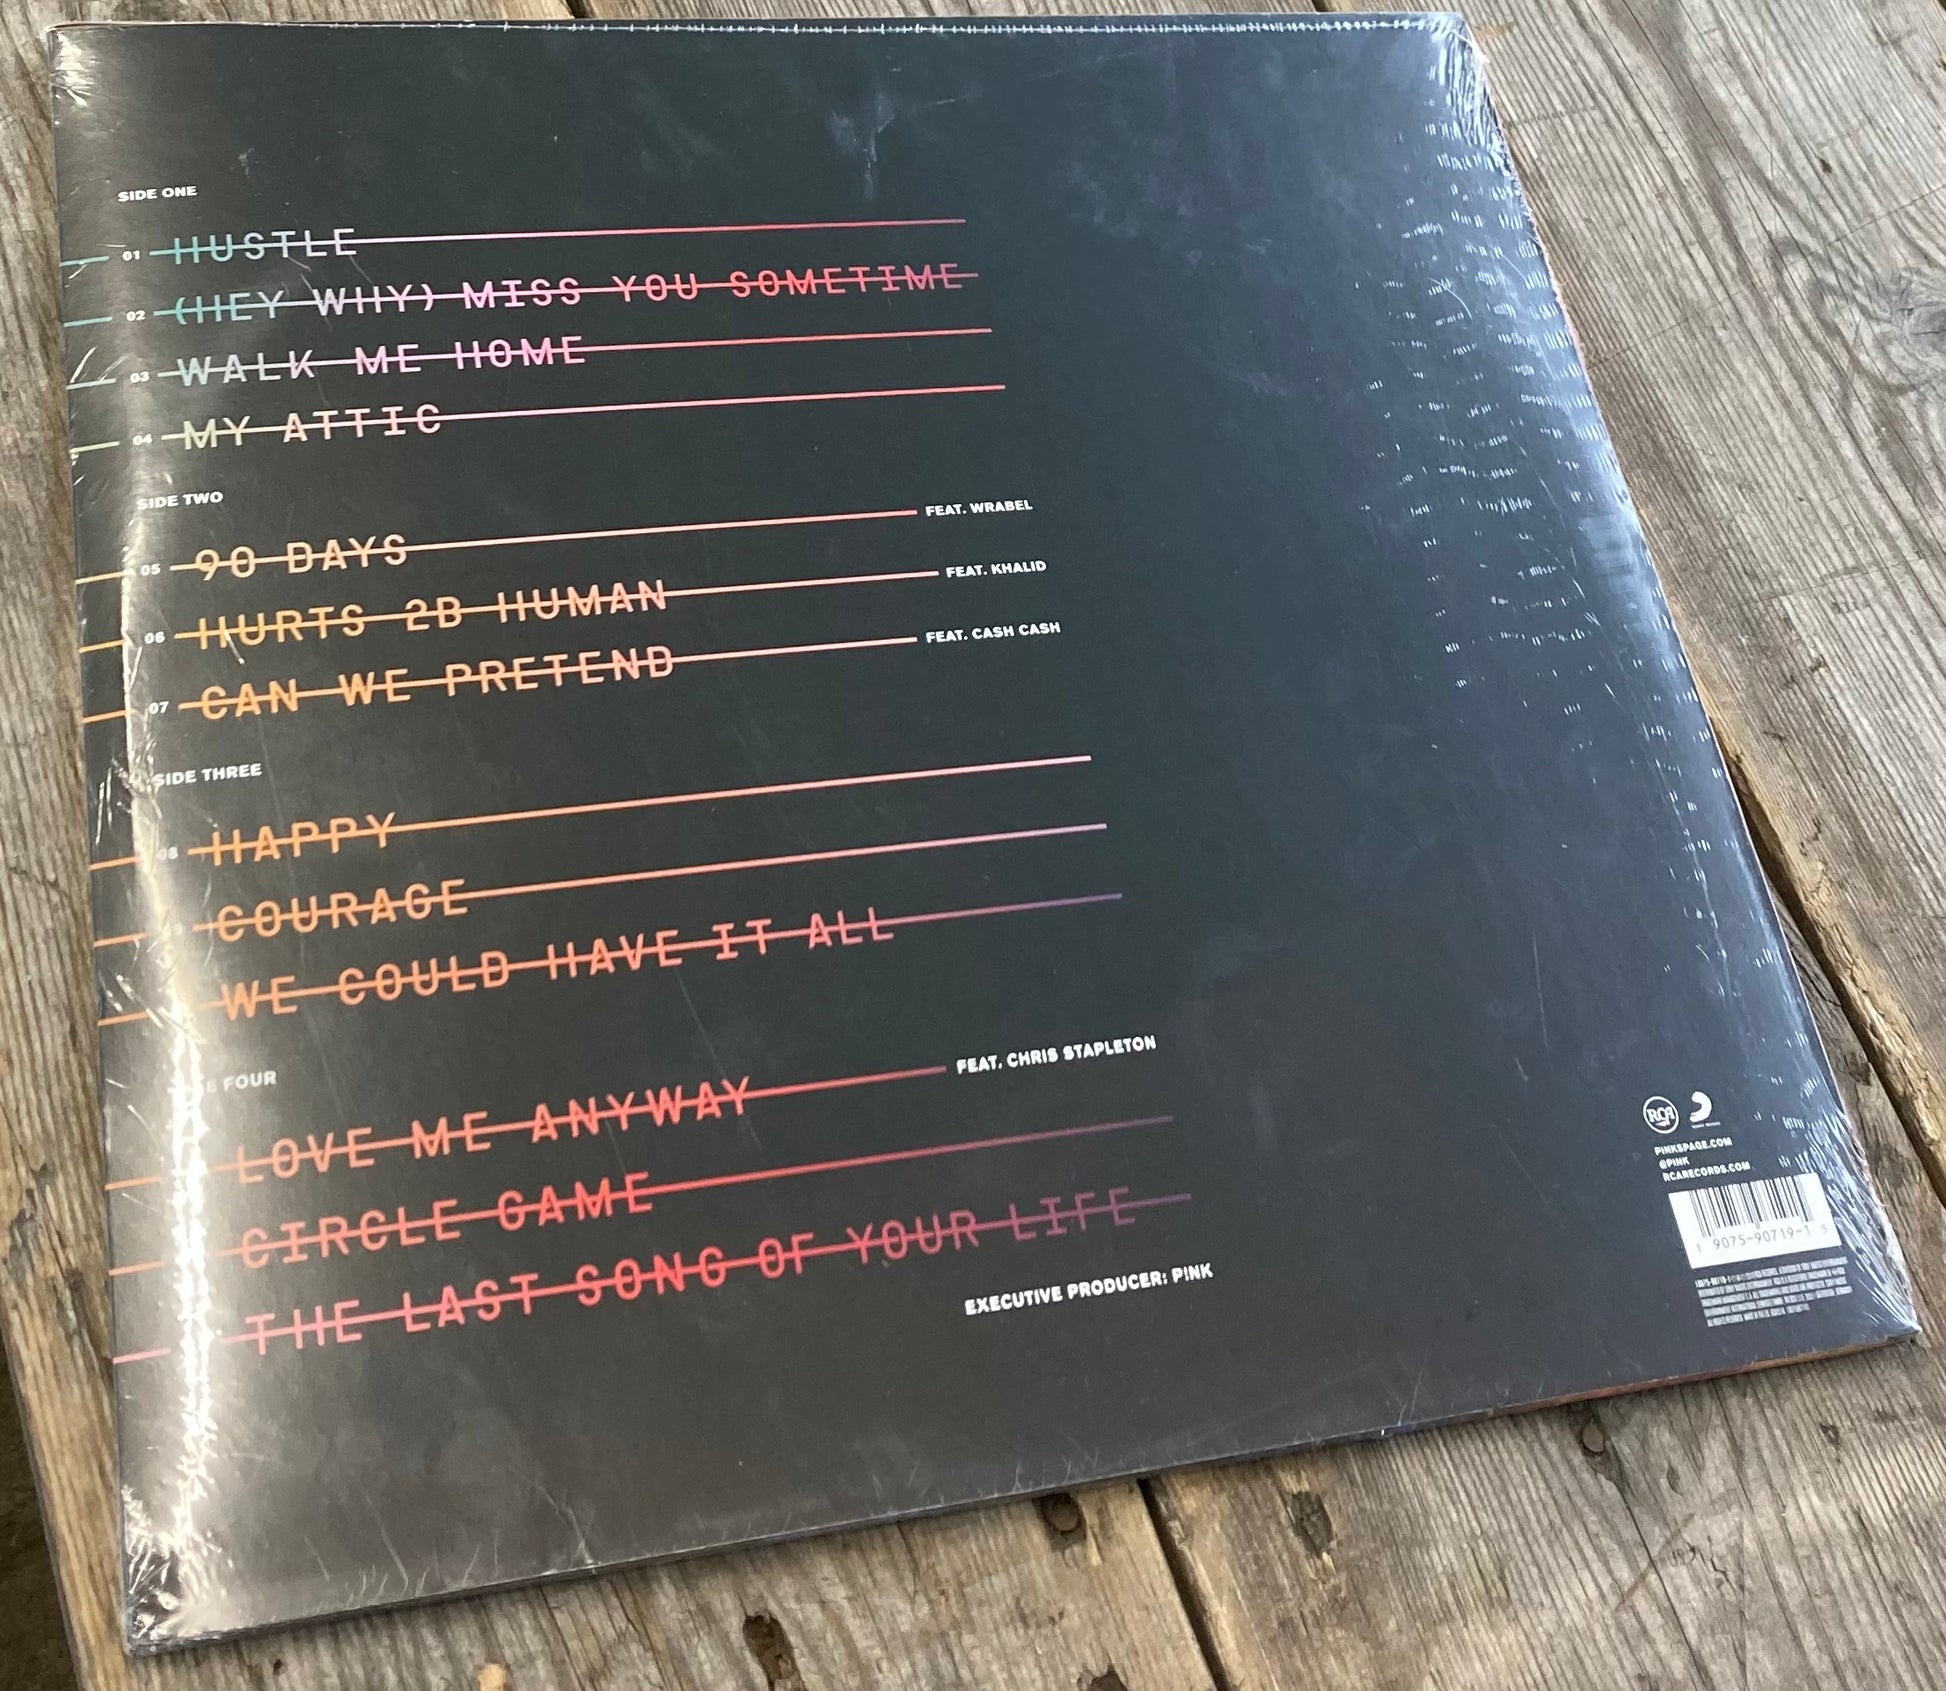 The back of ‘Pink - Hurts 2B Human’ on vinyl